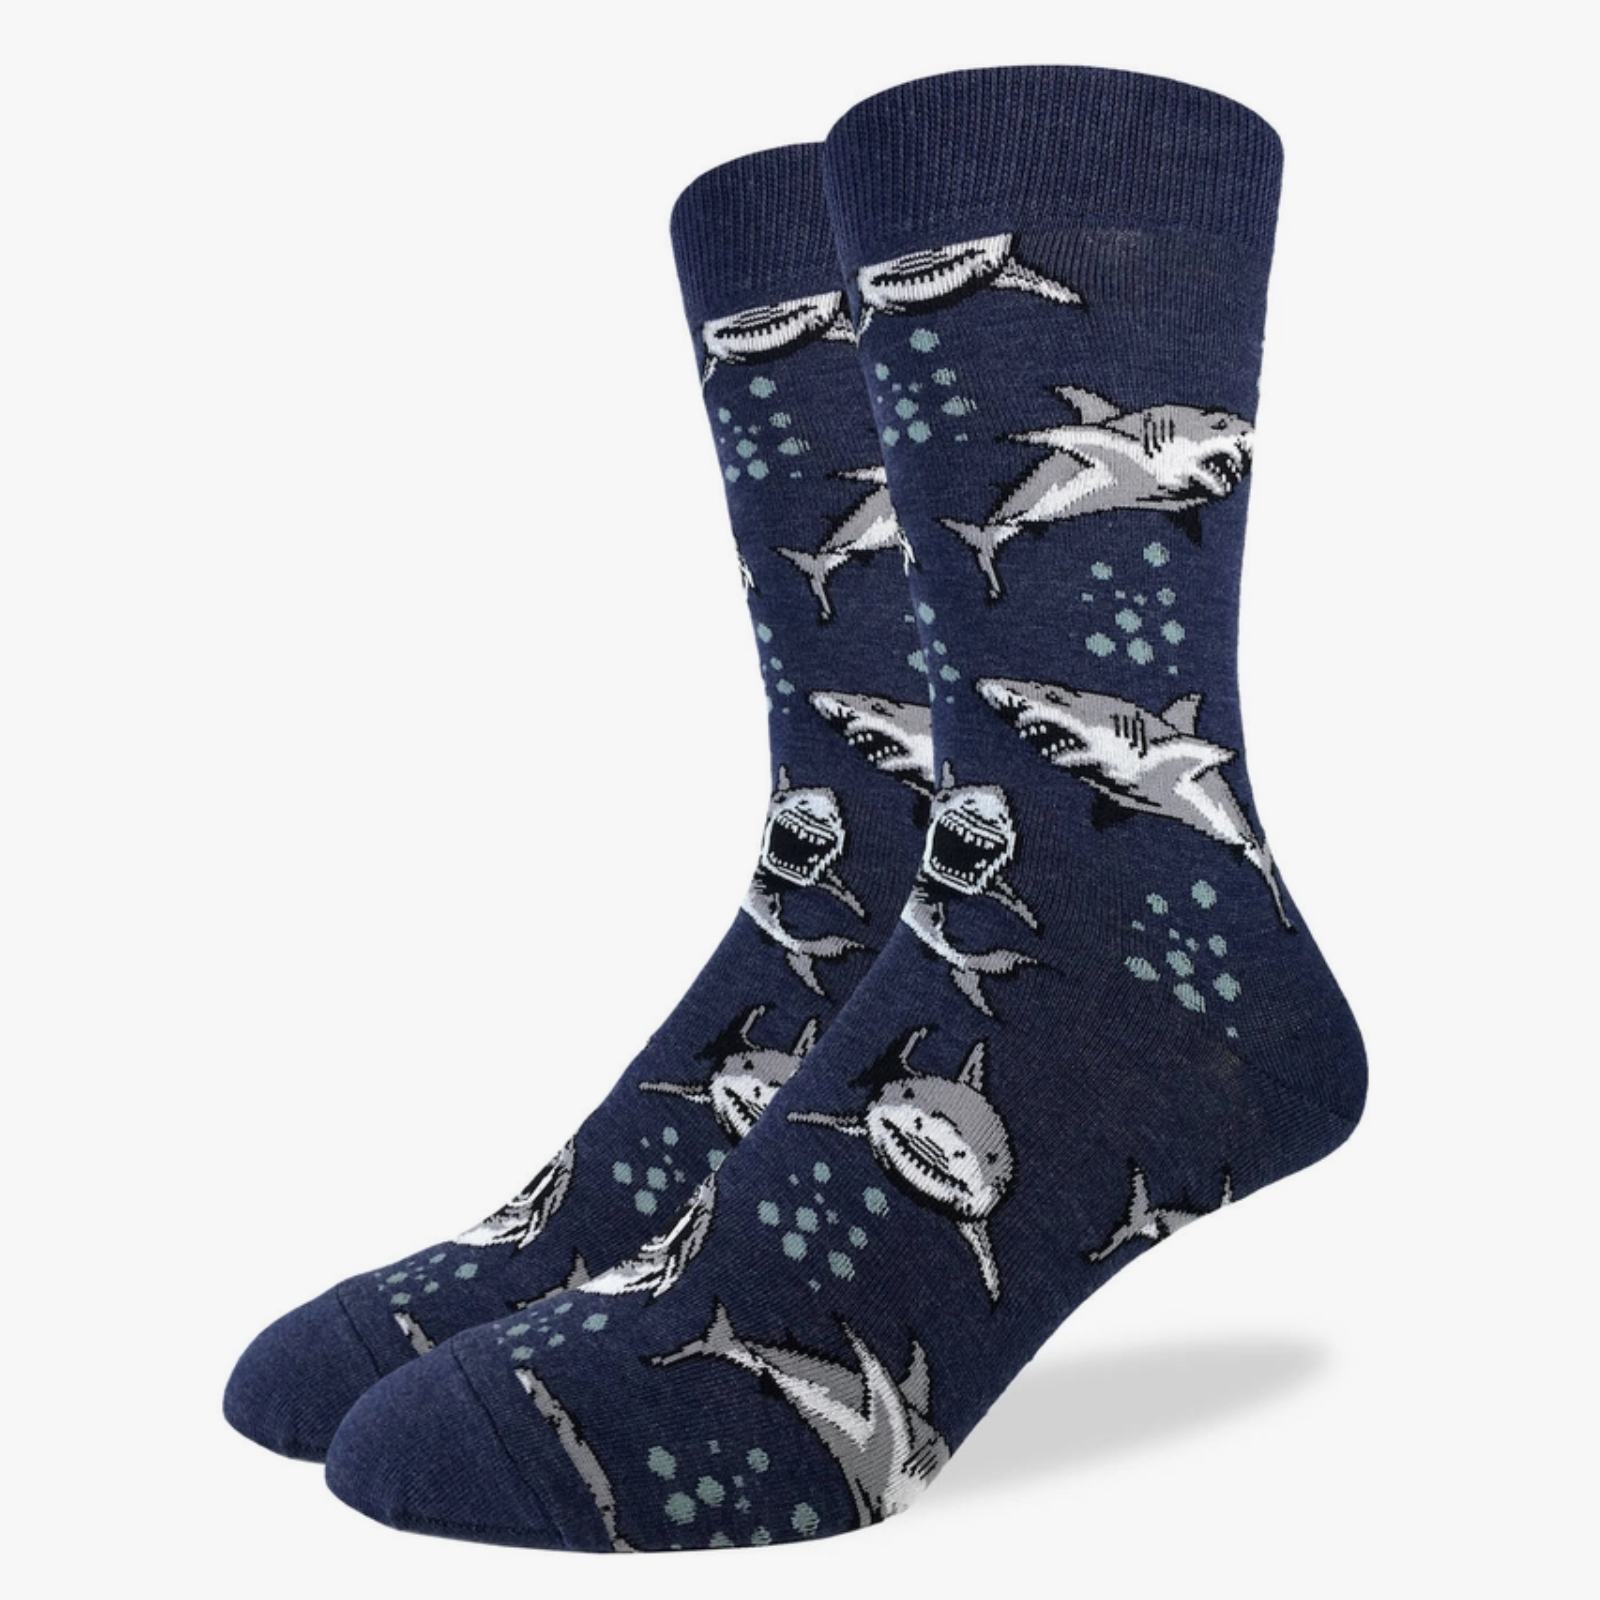 Good Luck Sock Shark Attack men's crew sock featuring navy blue sock with white and gray sharks on display feet